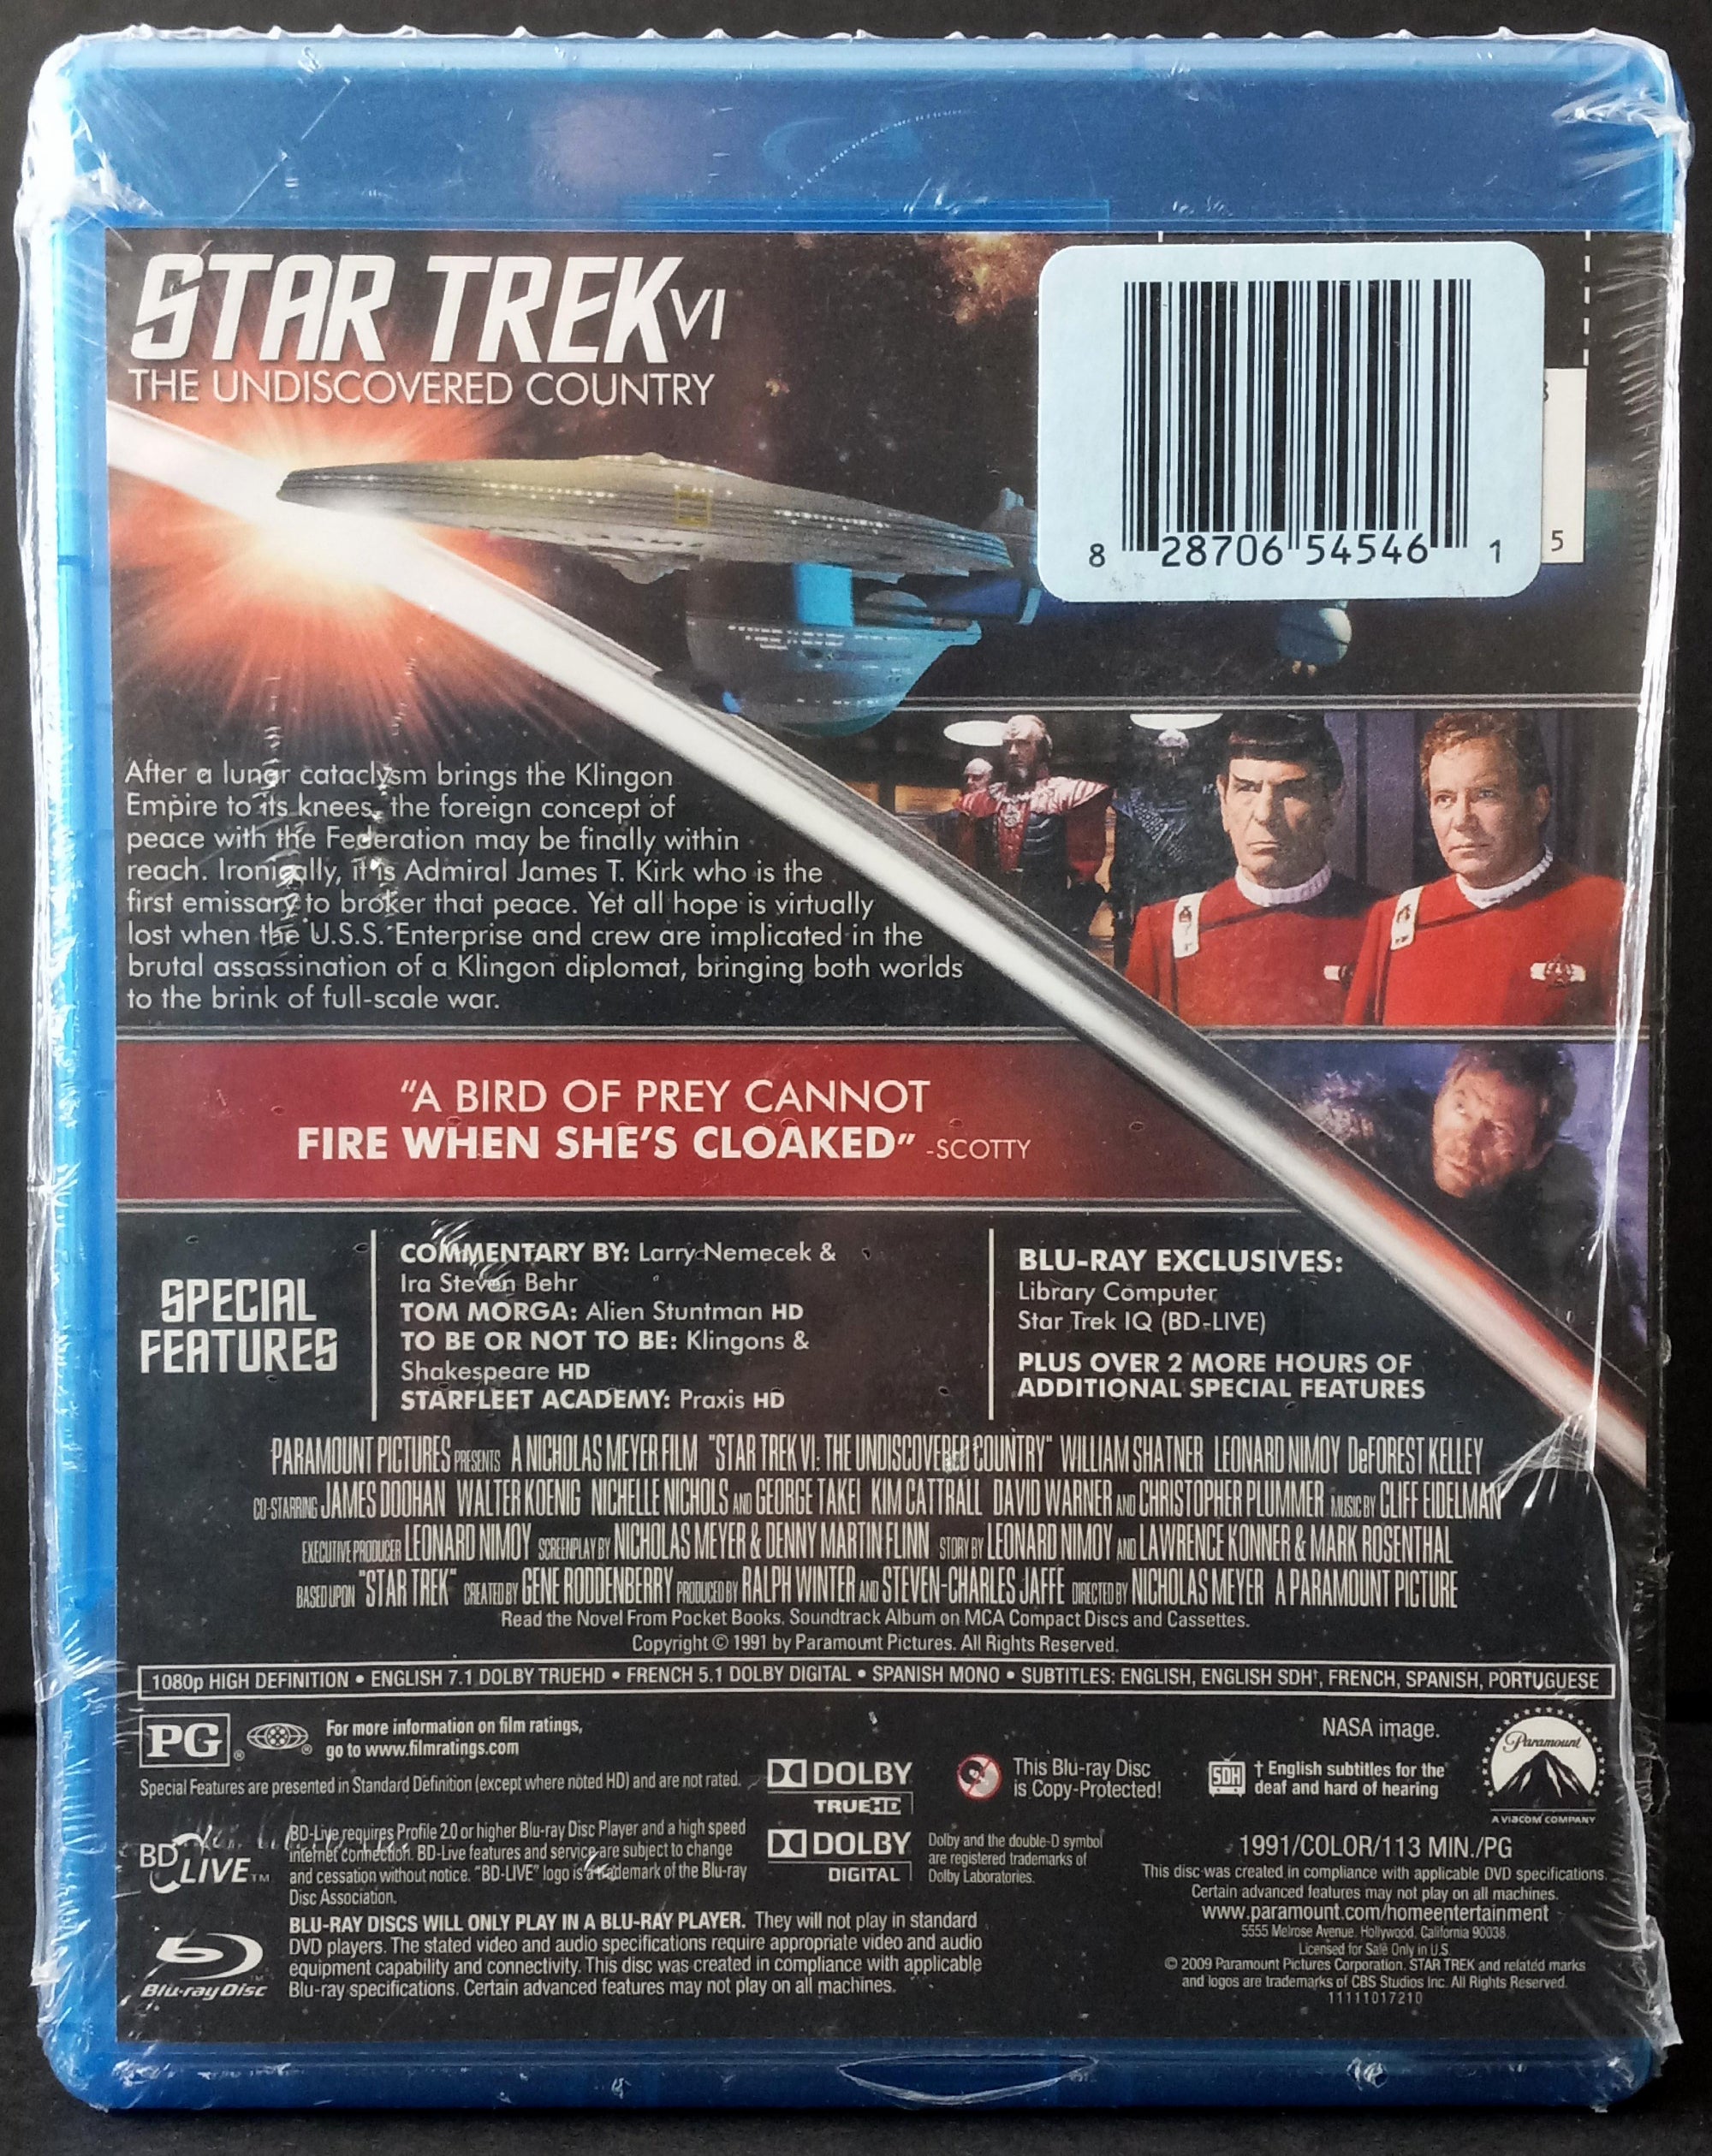 STAR TREK VI: THE UNDISCOVERED COUNTRY - Blu-Ray (sealed), 2009